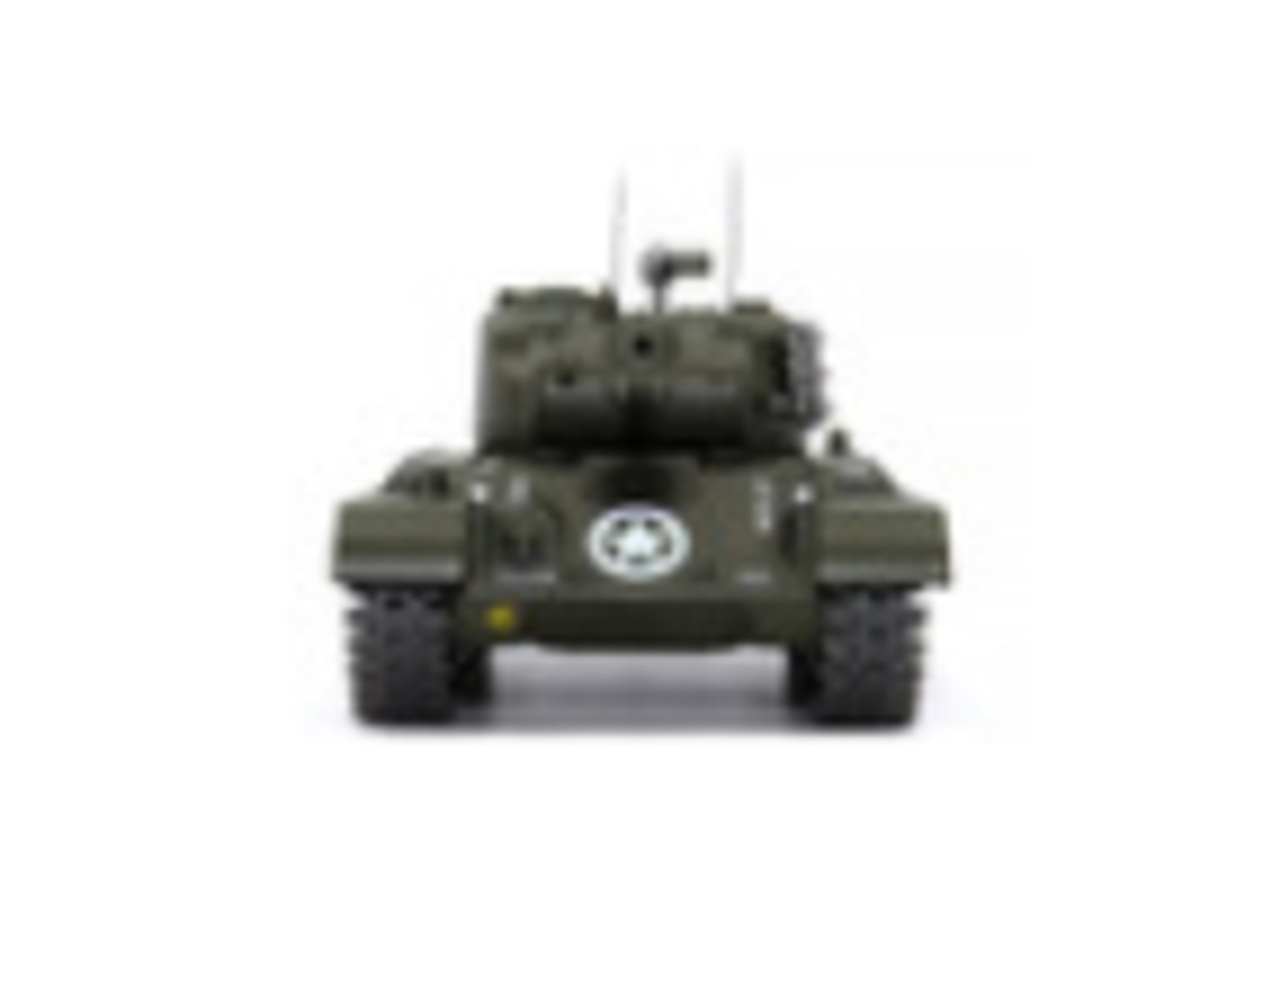 M26 (T26E3) Tank "U.S.A. 2nd Armored Division Germany April 1945" 1/43 Diecast Model by AFVs of WWII